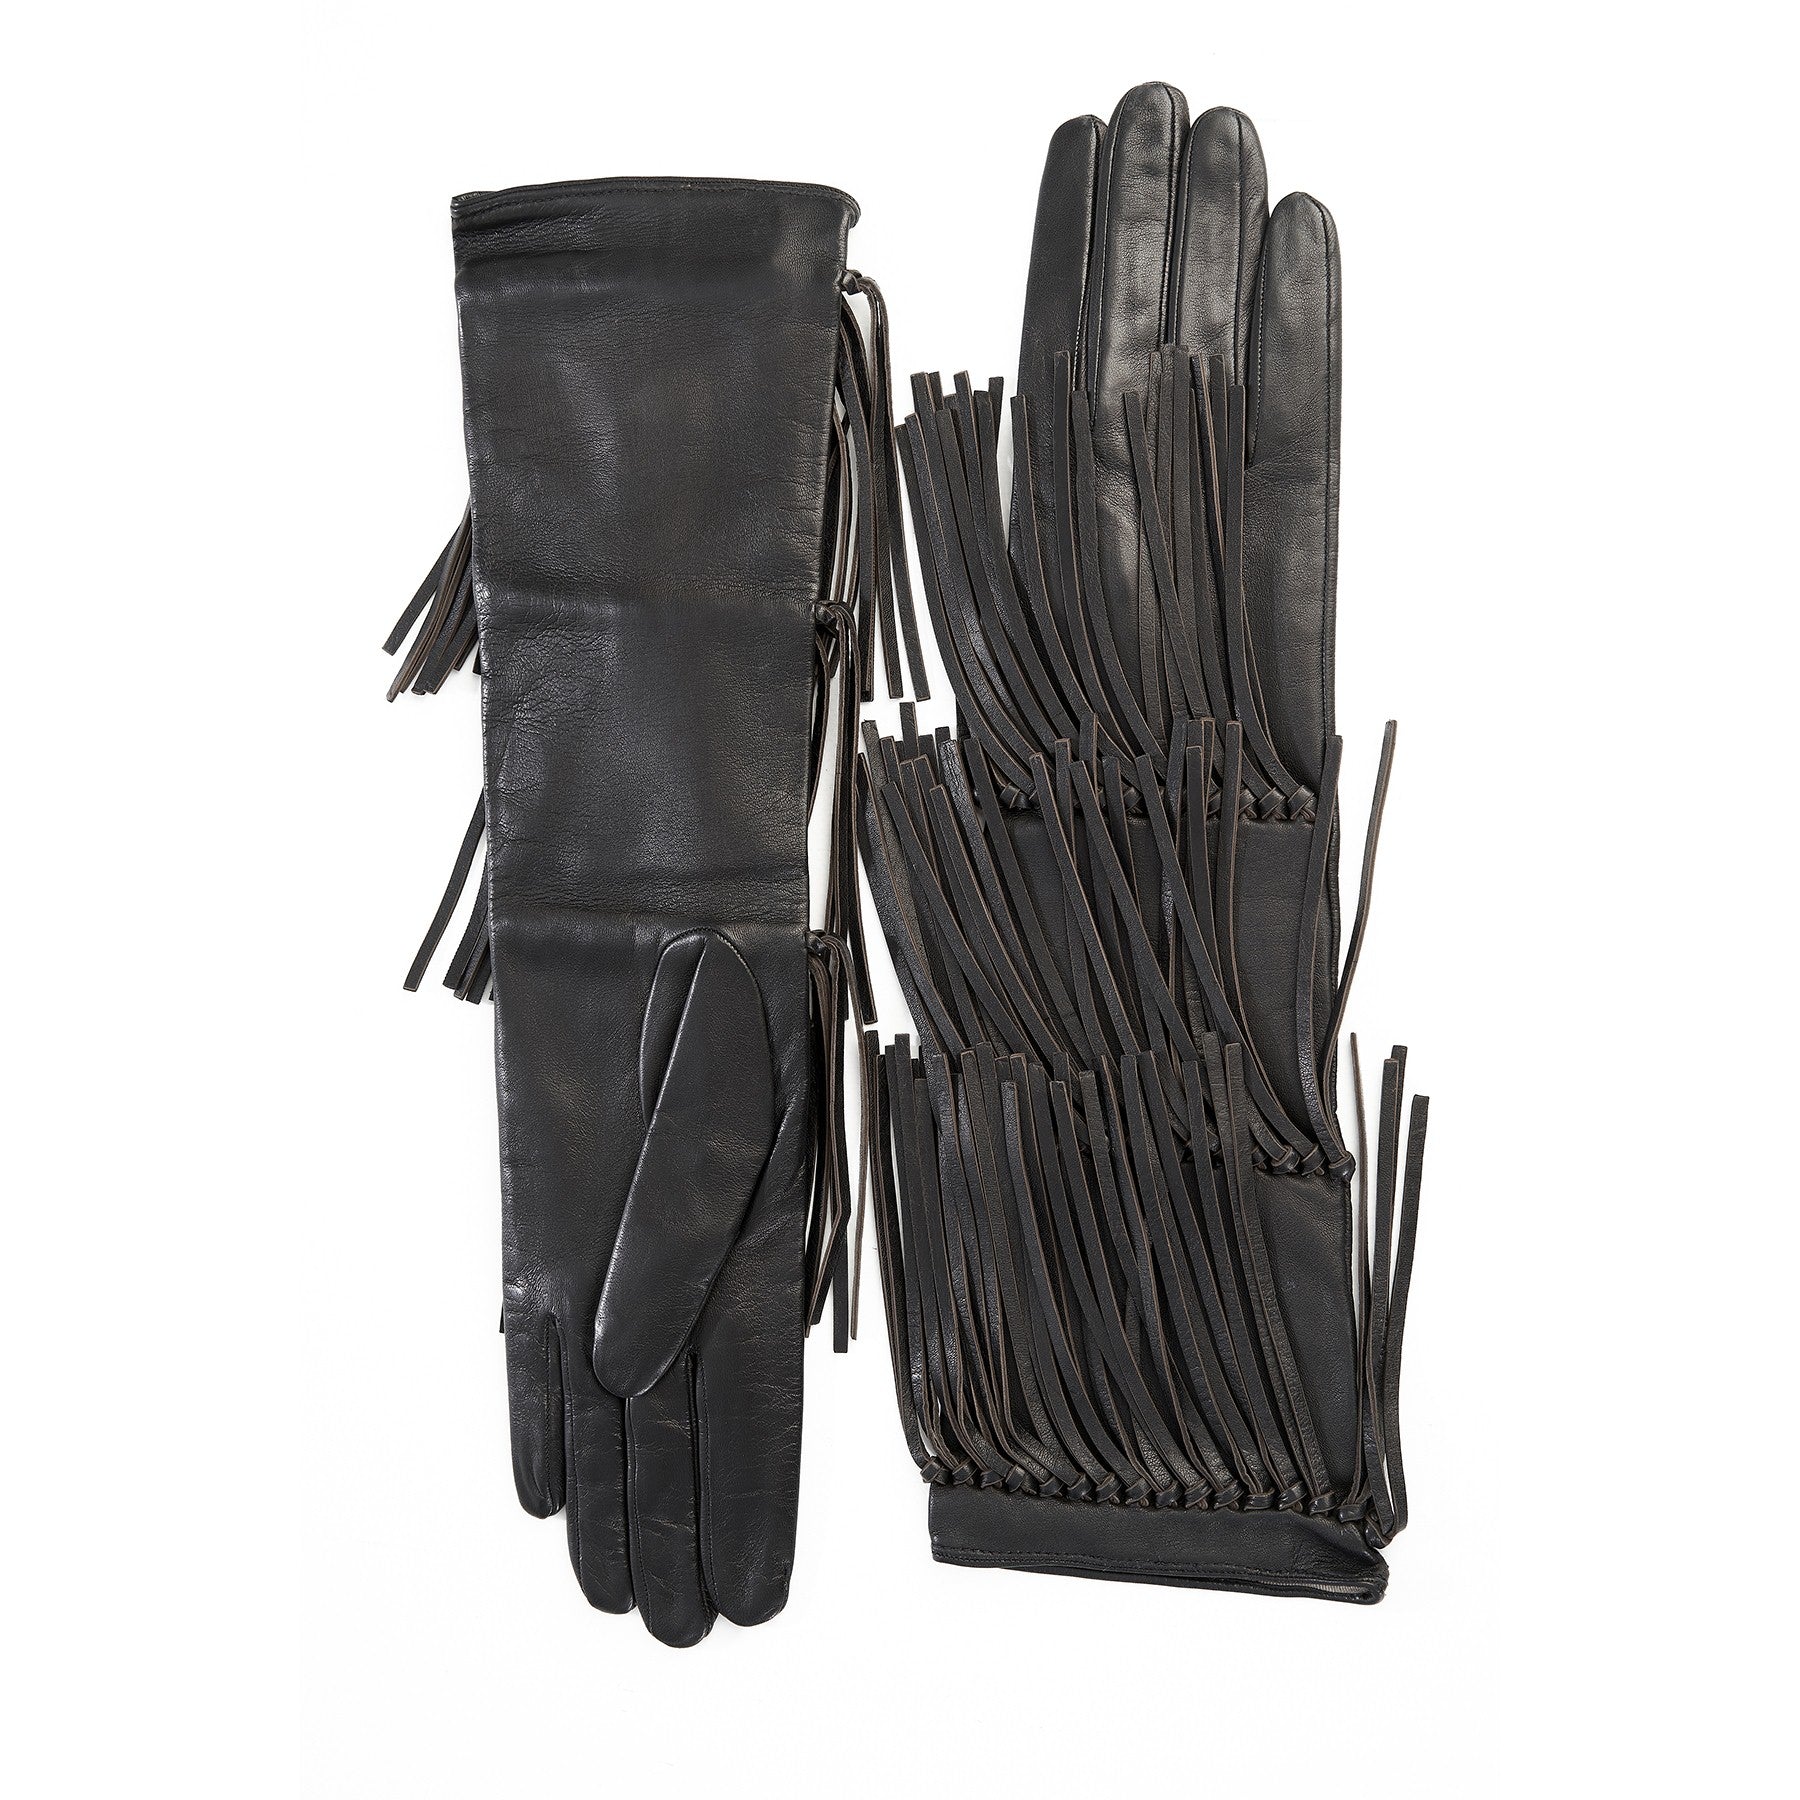 Women's black leather gloves with fringes silk lined